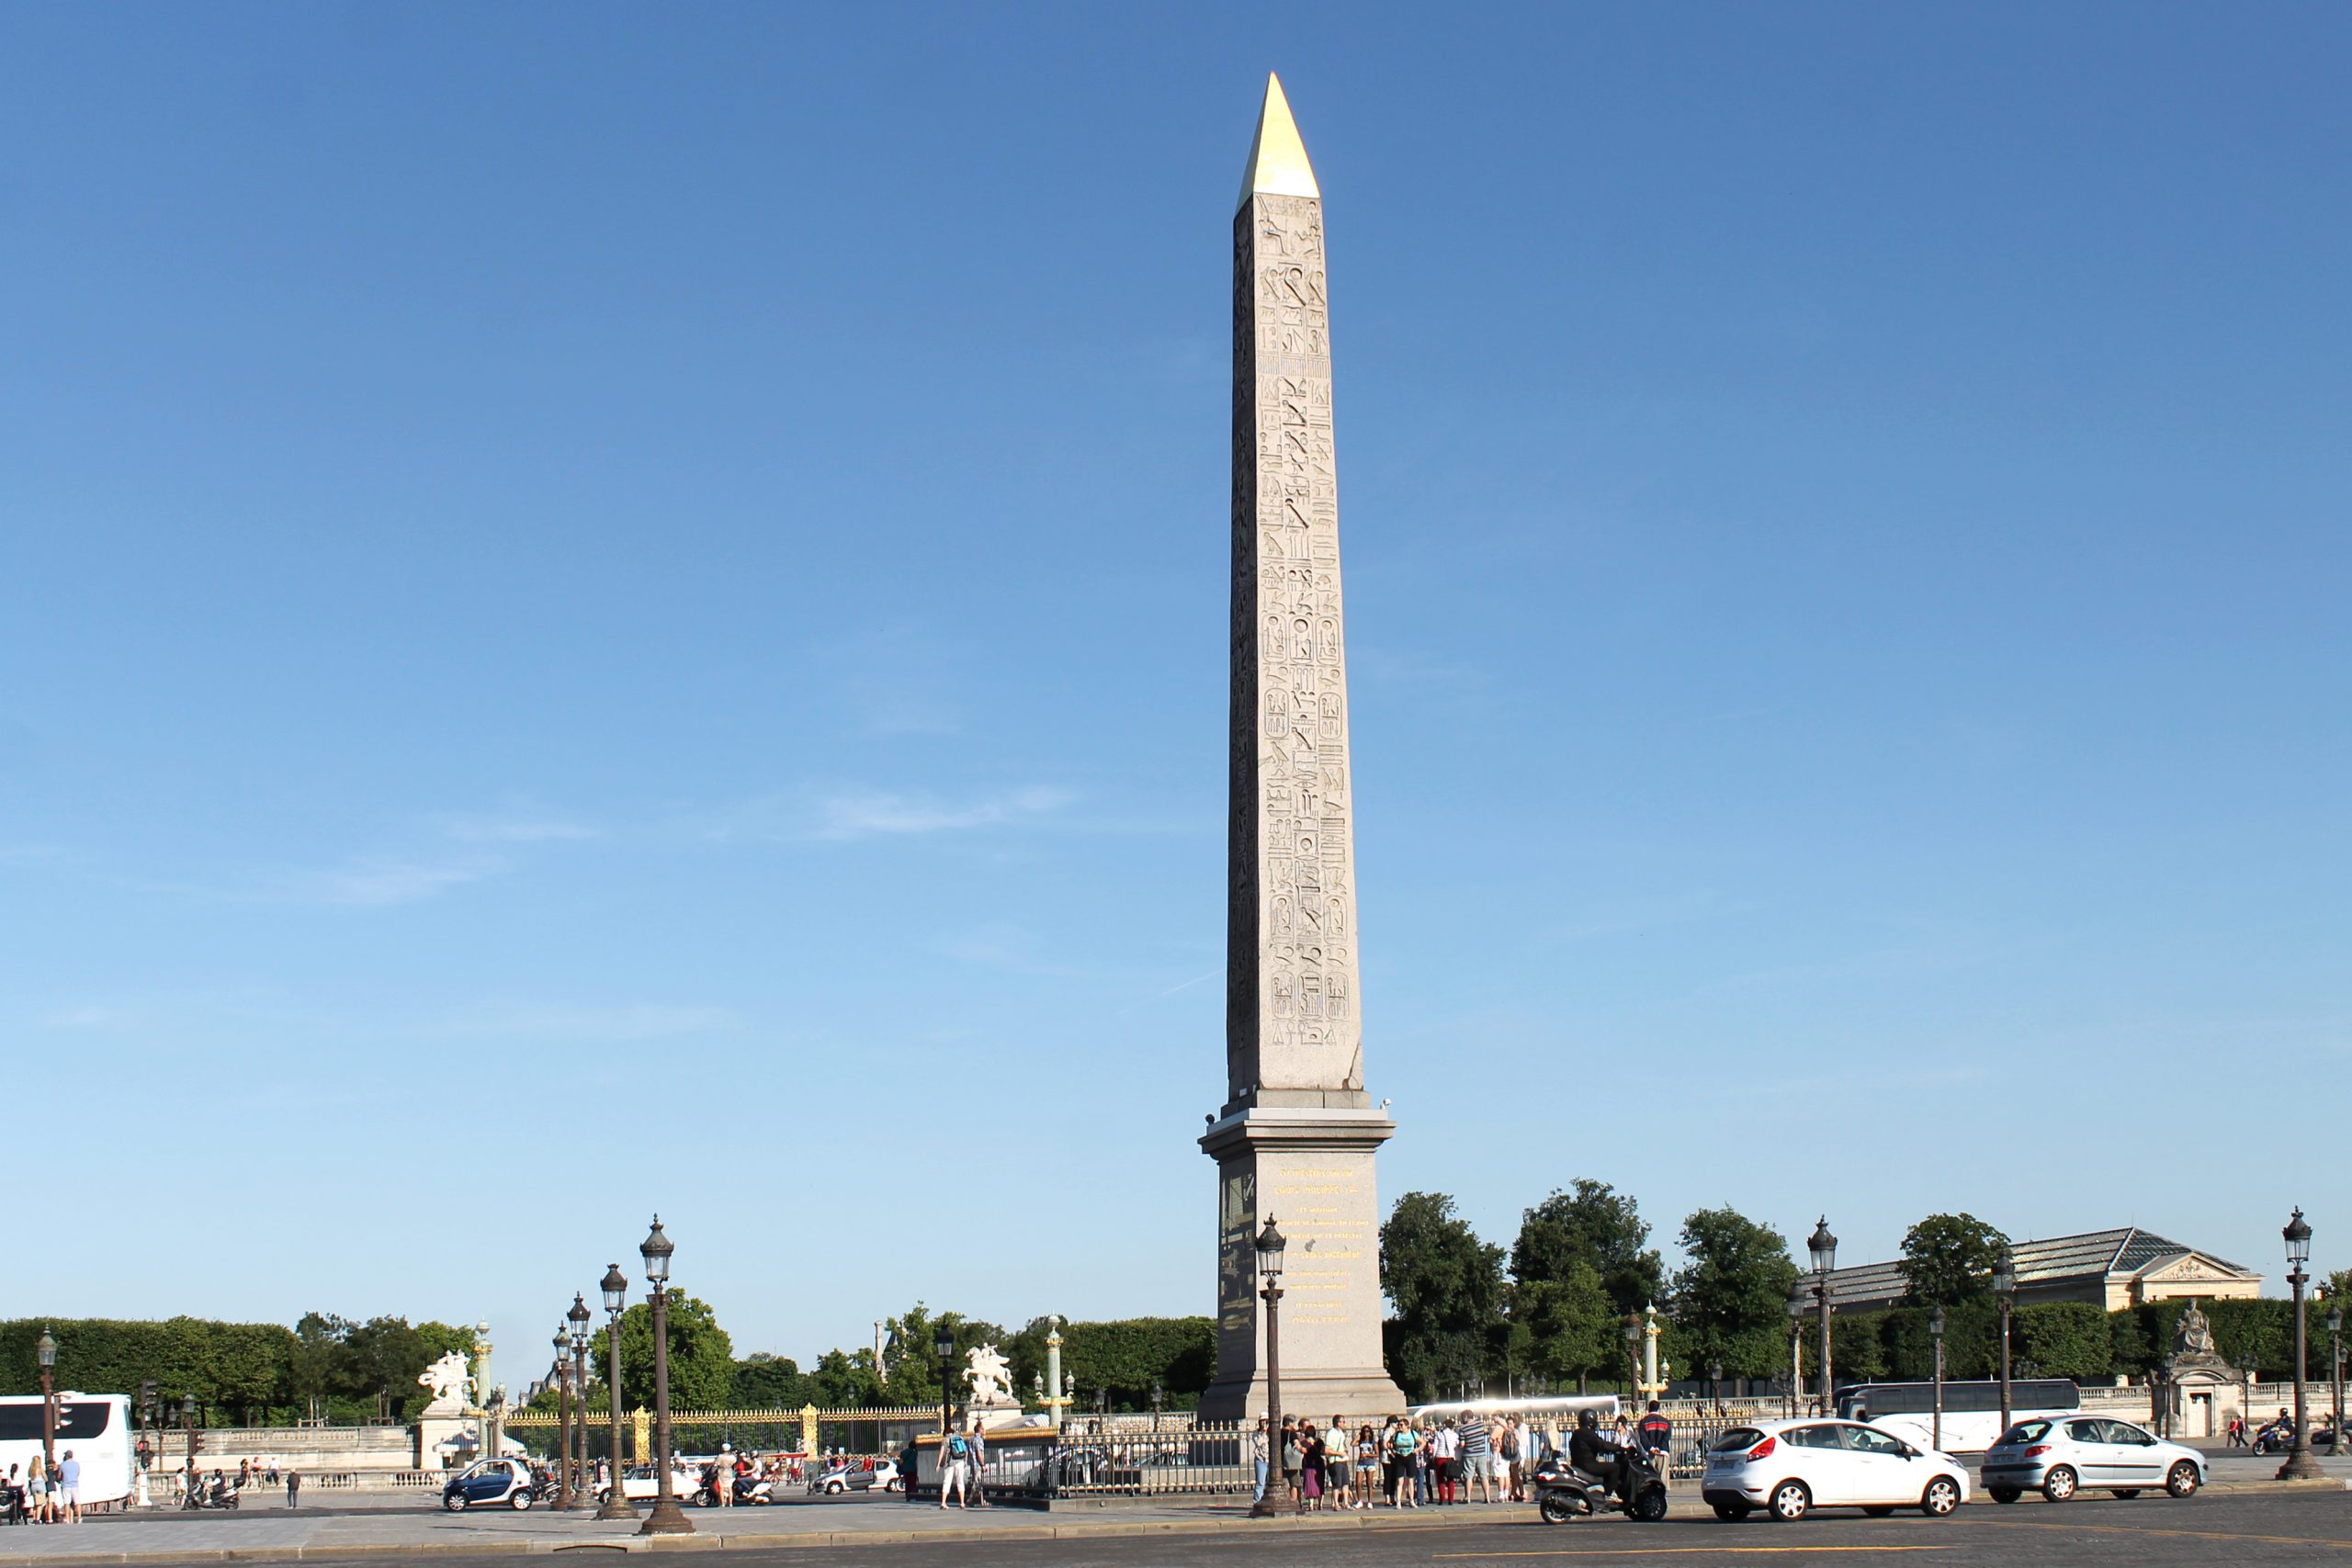 The Luxor Obelisk - Things To Do at Place de la Concorde Paris Olympics 2024 | Top Attractions, Night Life, Restaurants